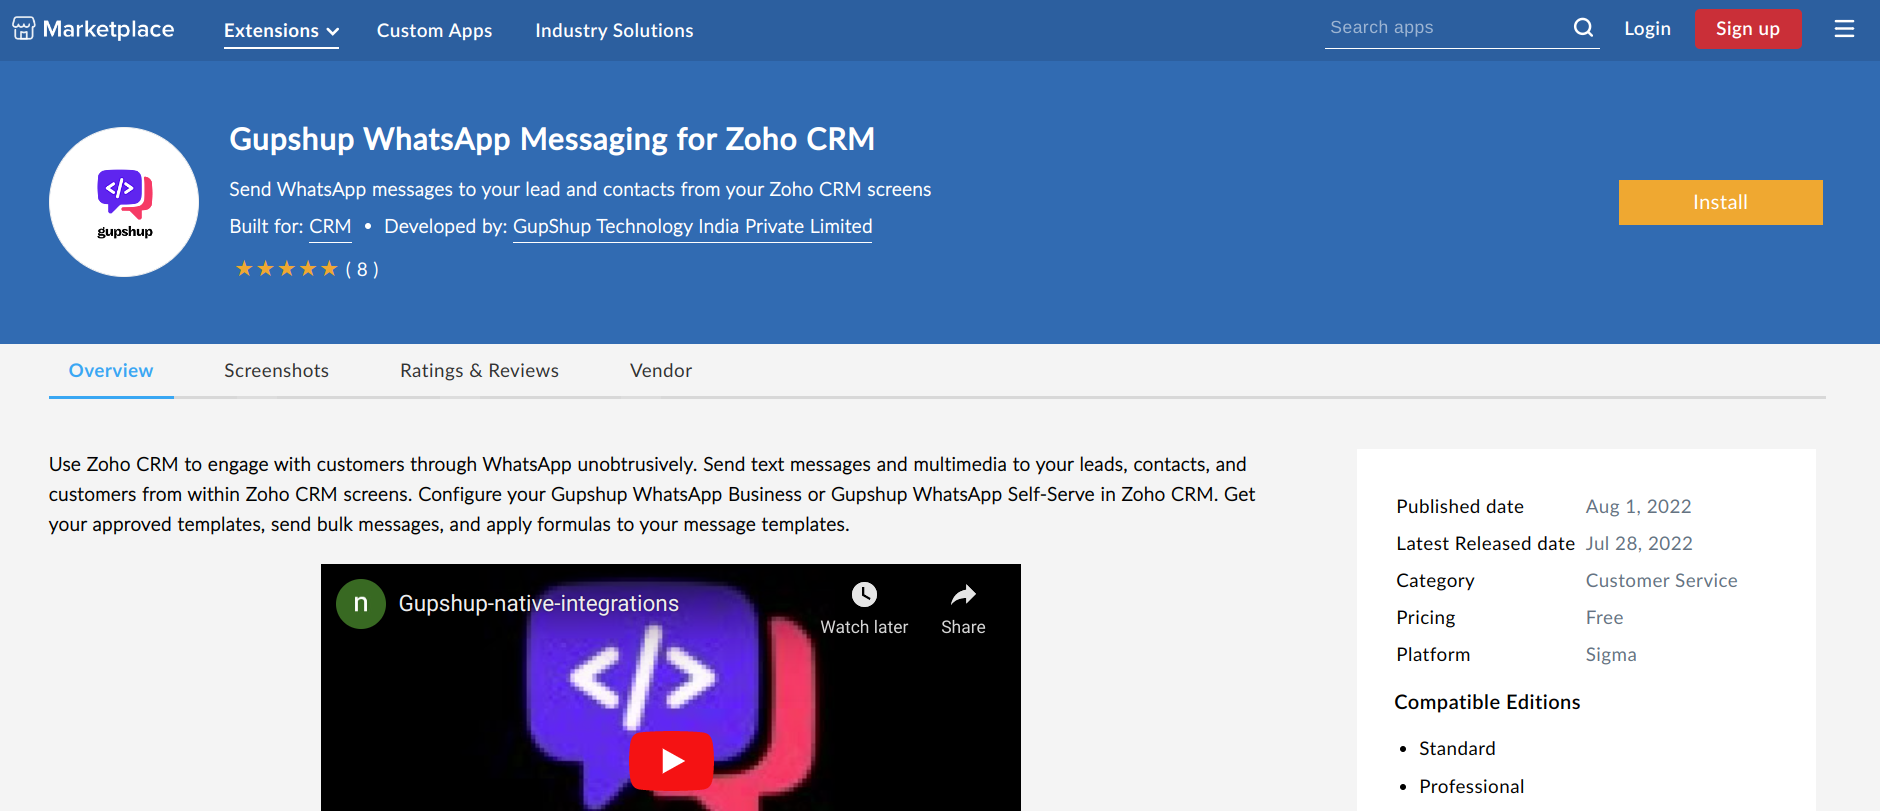 Install gupshup whatsapp messaging for zoho crm extension